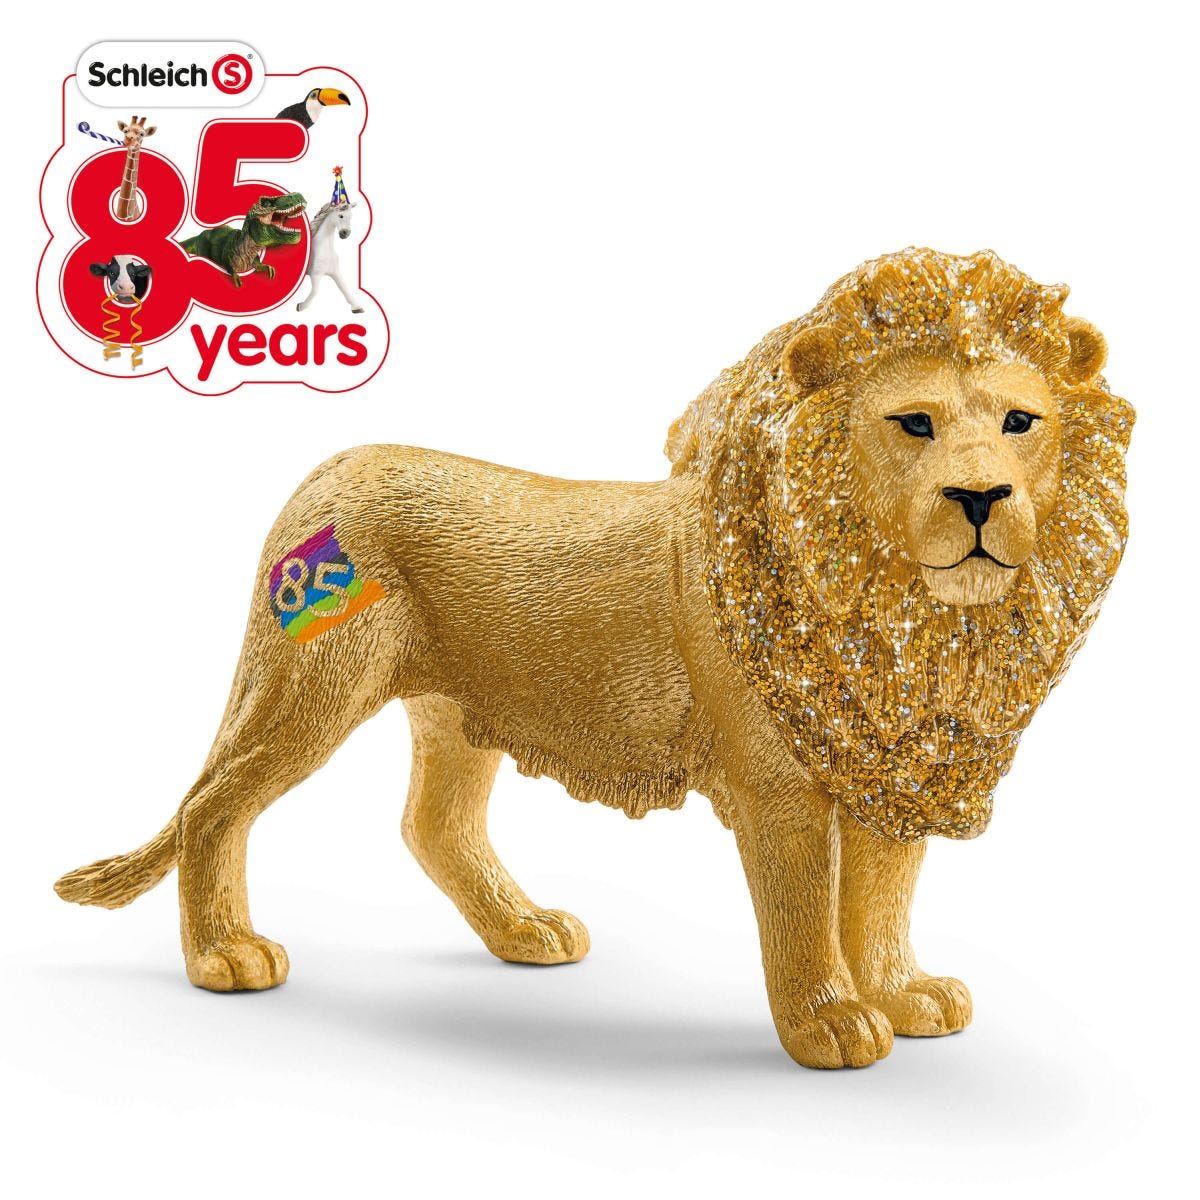 Limited-Edition 85 Year Anniversary Lion